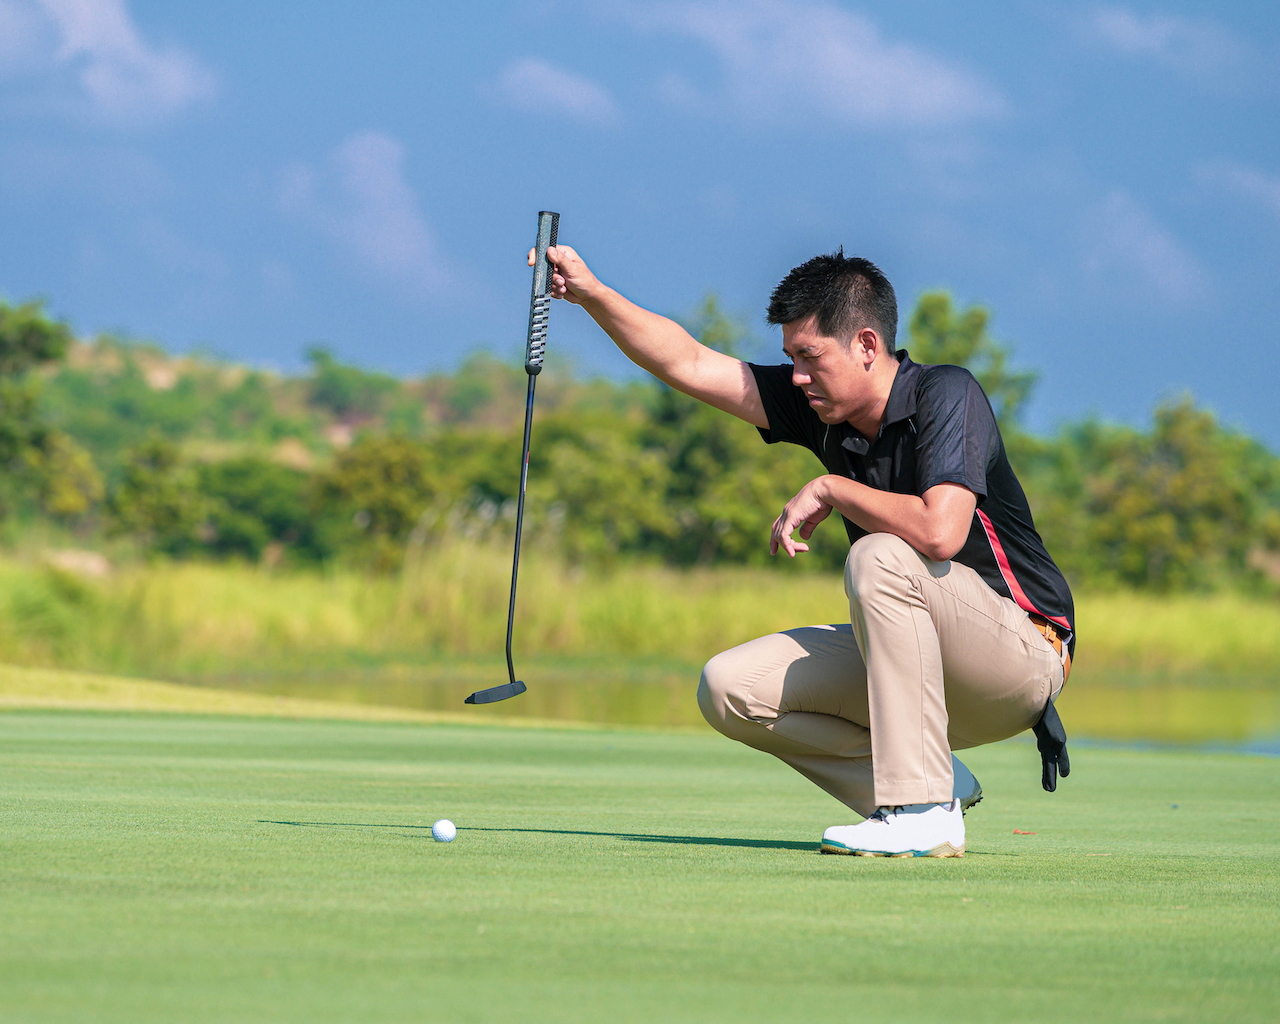 Man examining putting green with putter